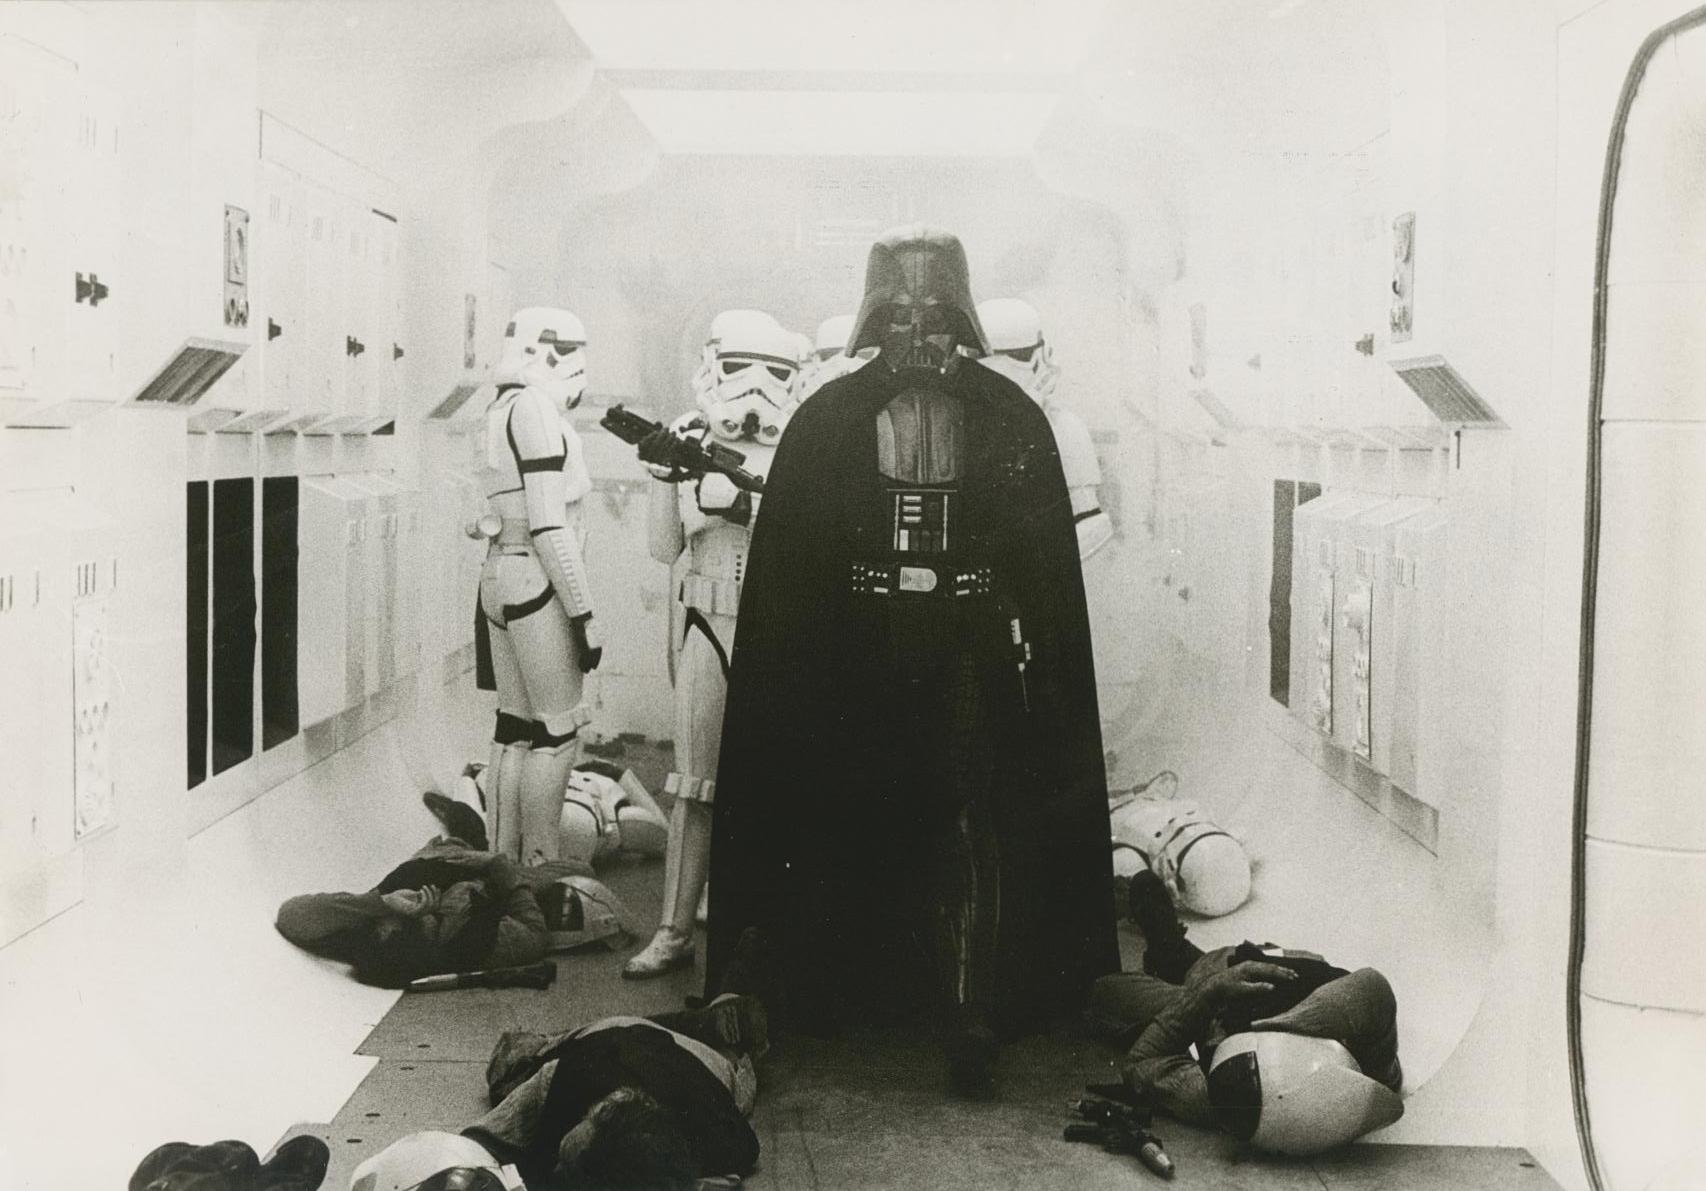 Unknown Black and White Photograph – Star Wars, Sience Fiction Filmstill, 1977